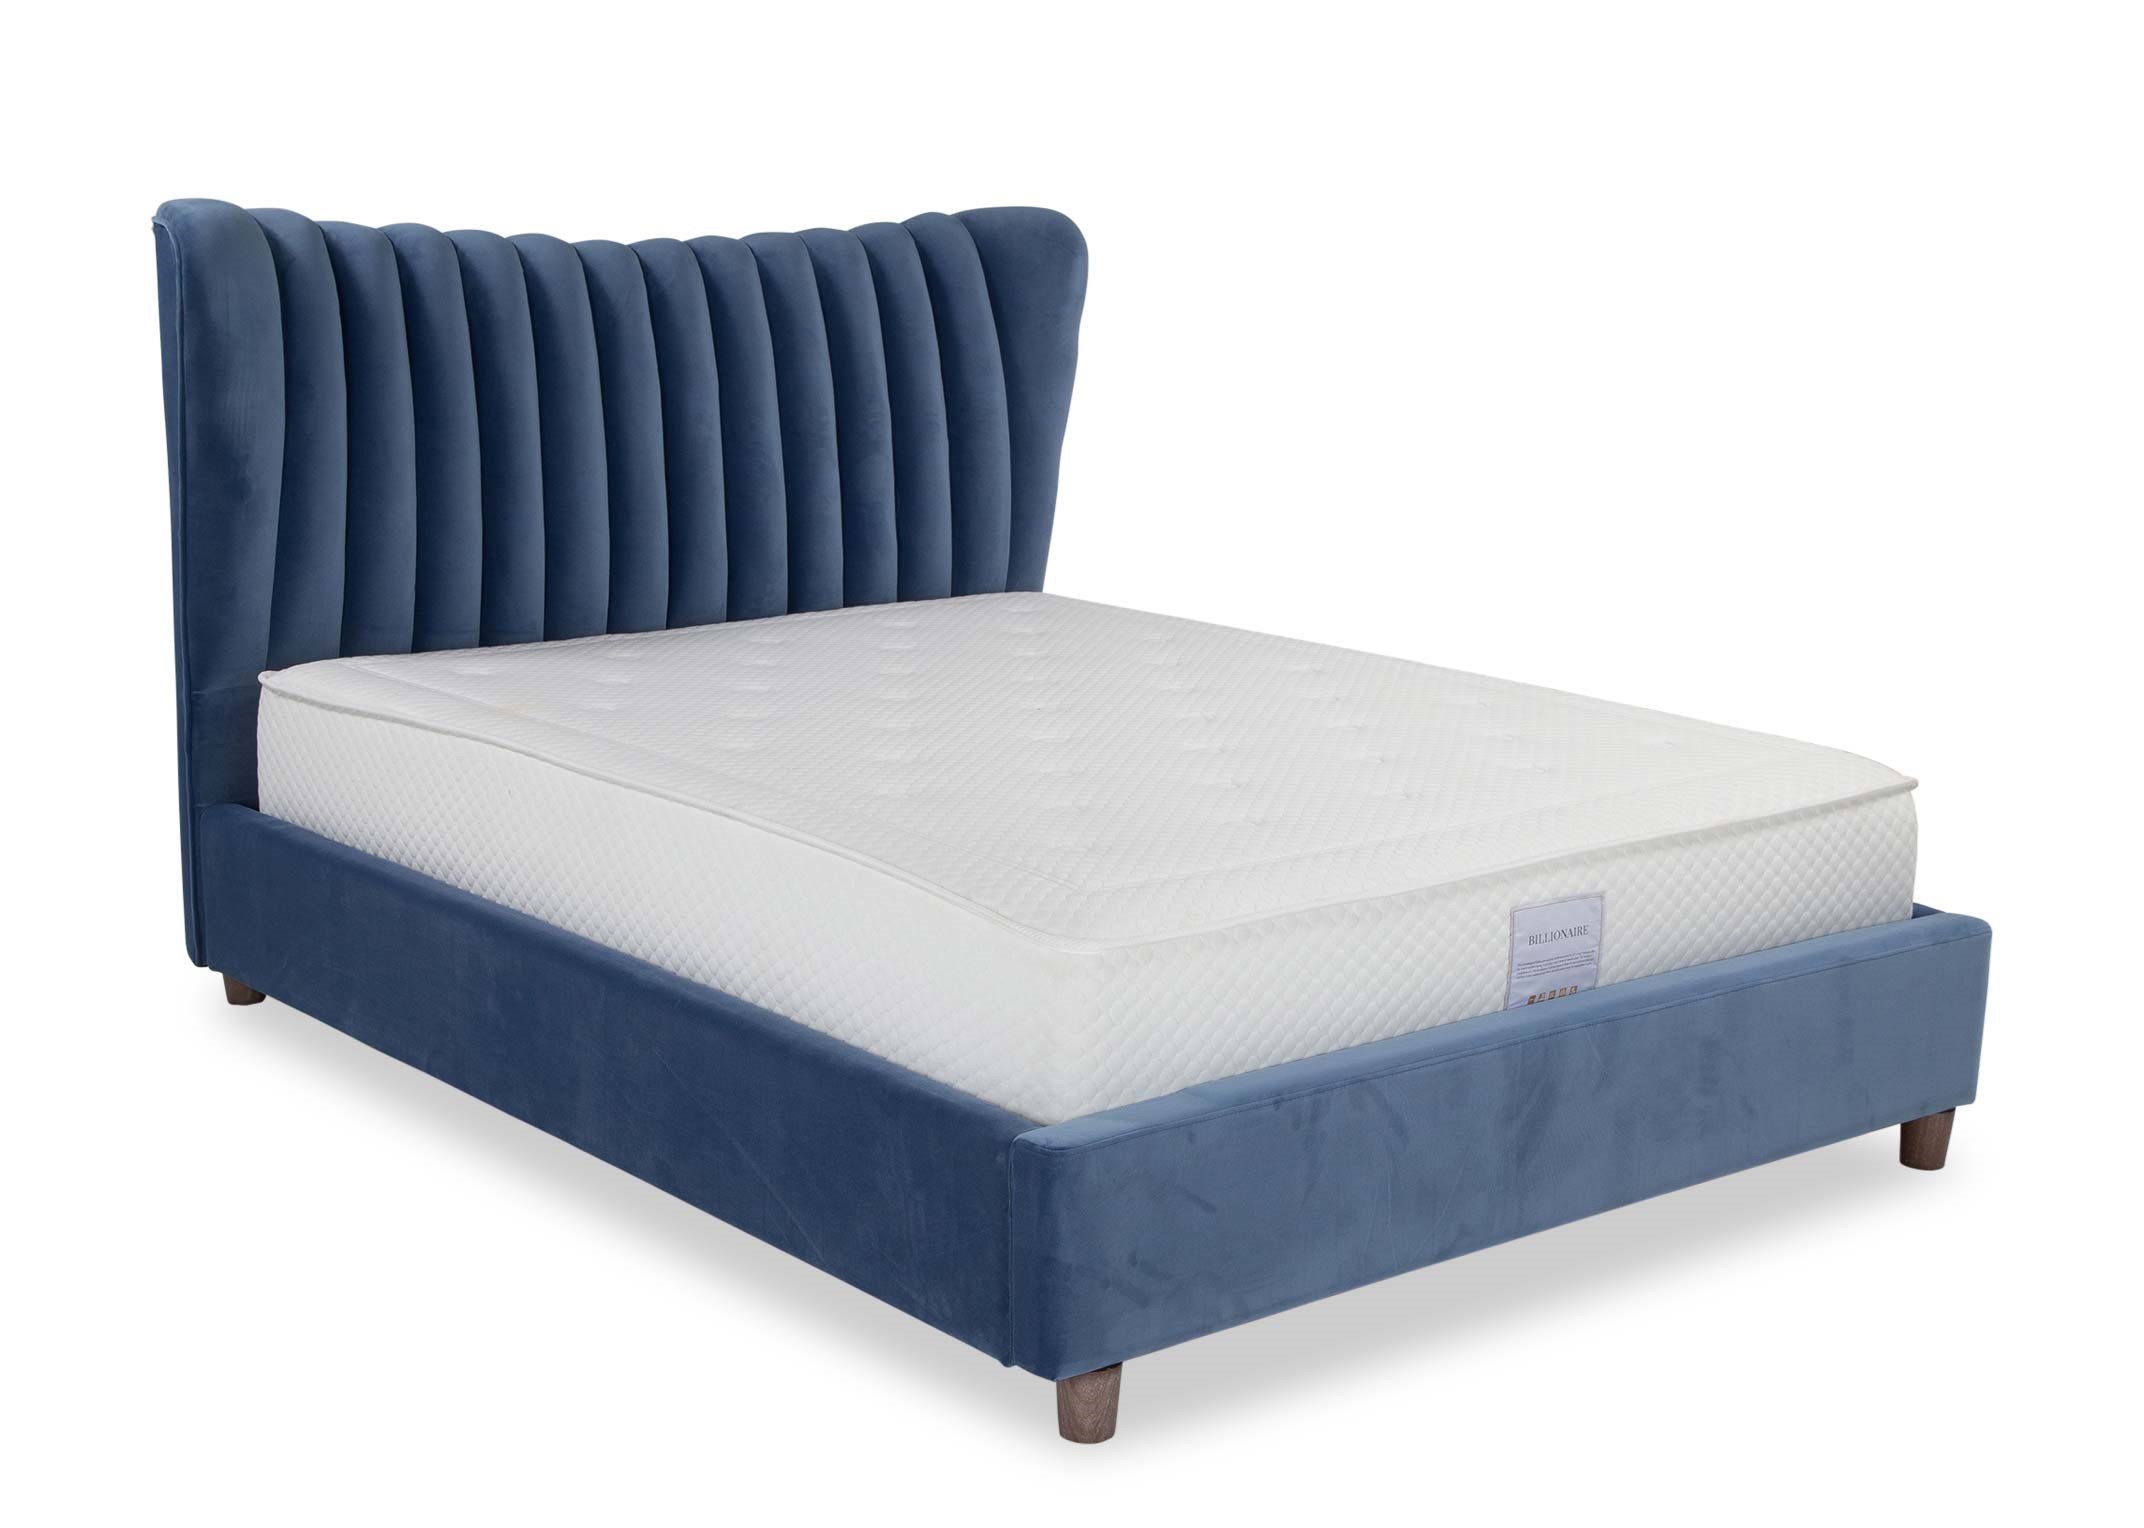 King Size 5ft Blue Fabric Bed Frame, King Fabric Headboard Beds